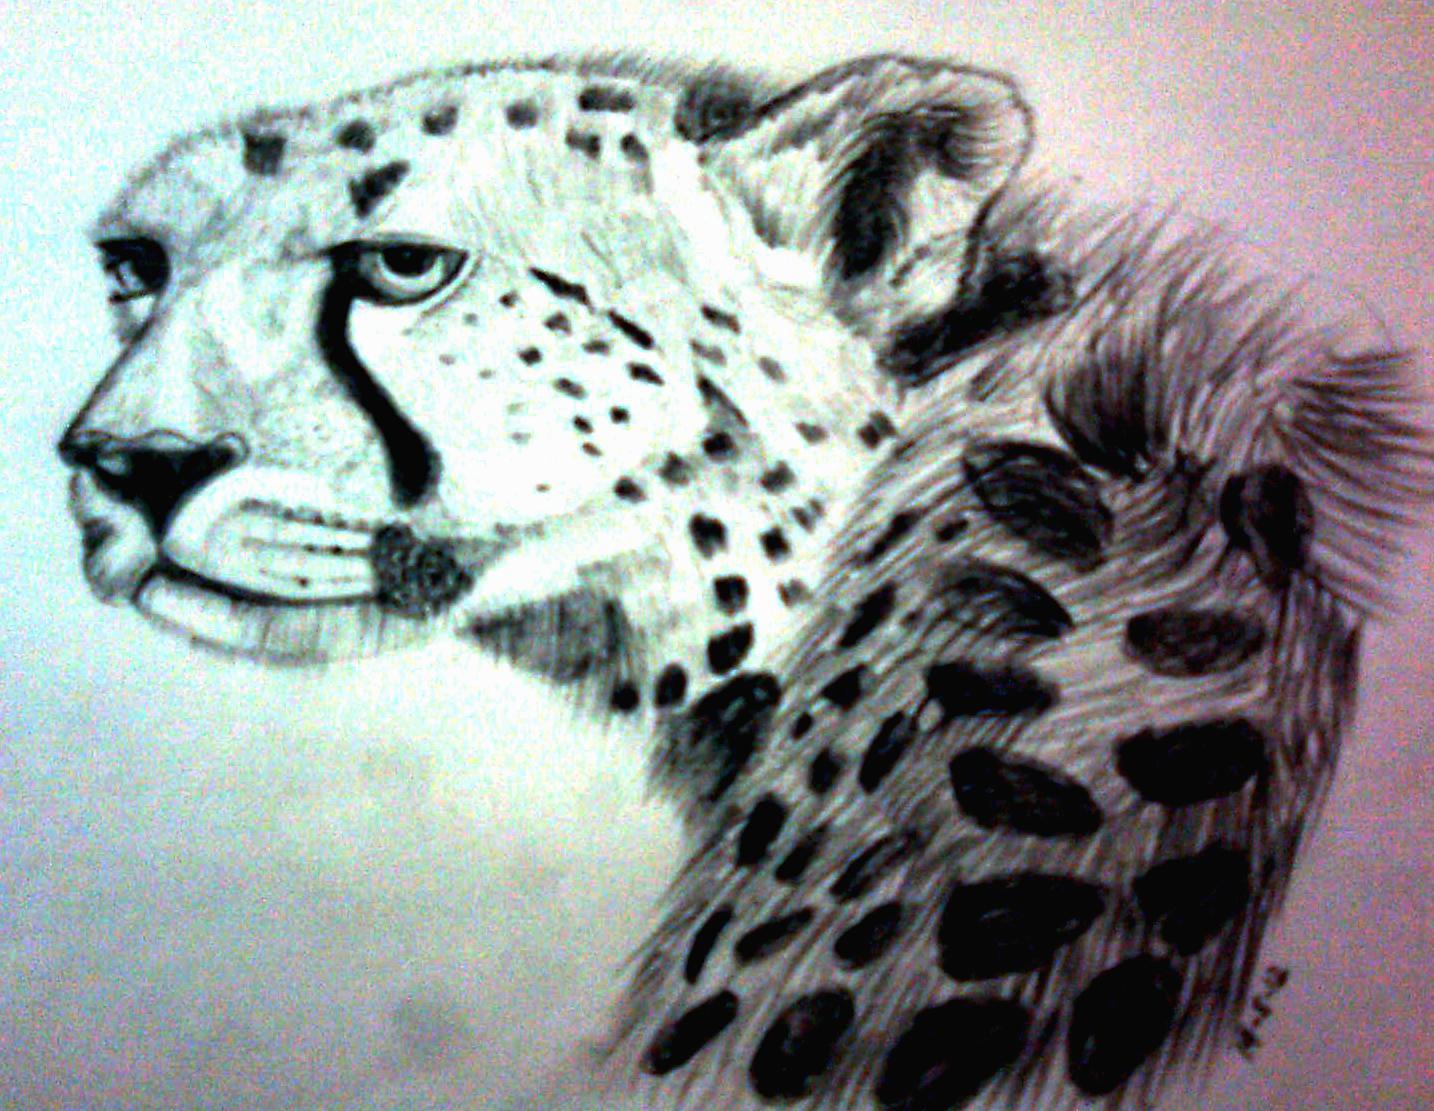 Buy Art Print of 'fierce', CHEETAH PORTRAIT Original Graphite Pencil Drawing  on Grainy Paper, Animal Art and Drawing Online in India - Etsy